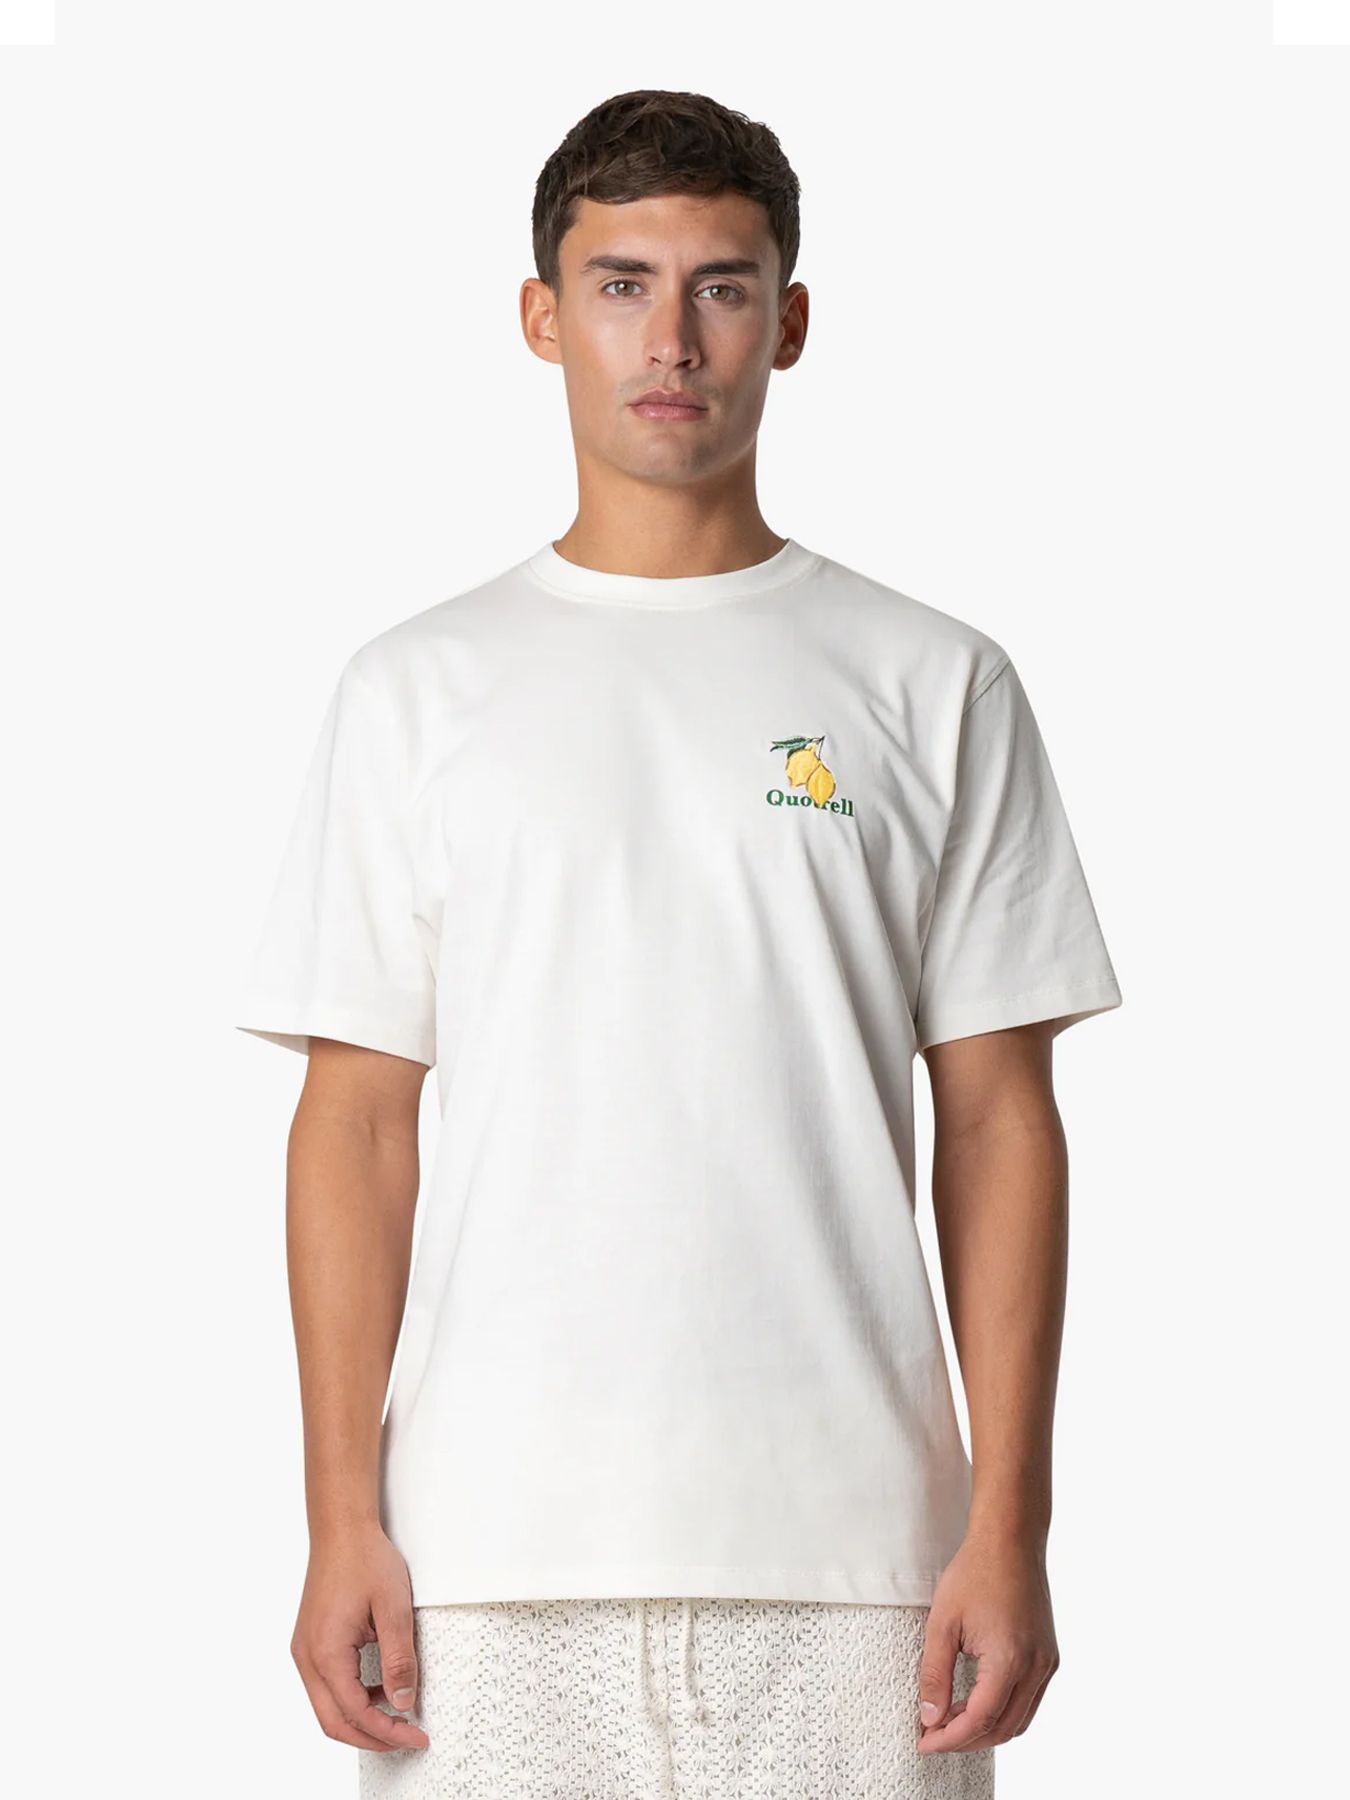 Quotrell Limone t-shirt Off White/green 00108491-OWG